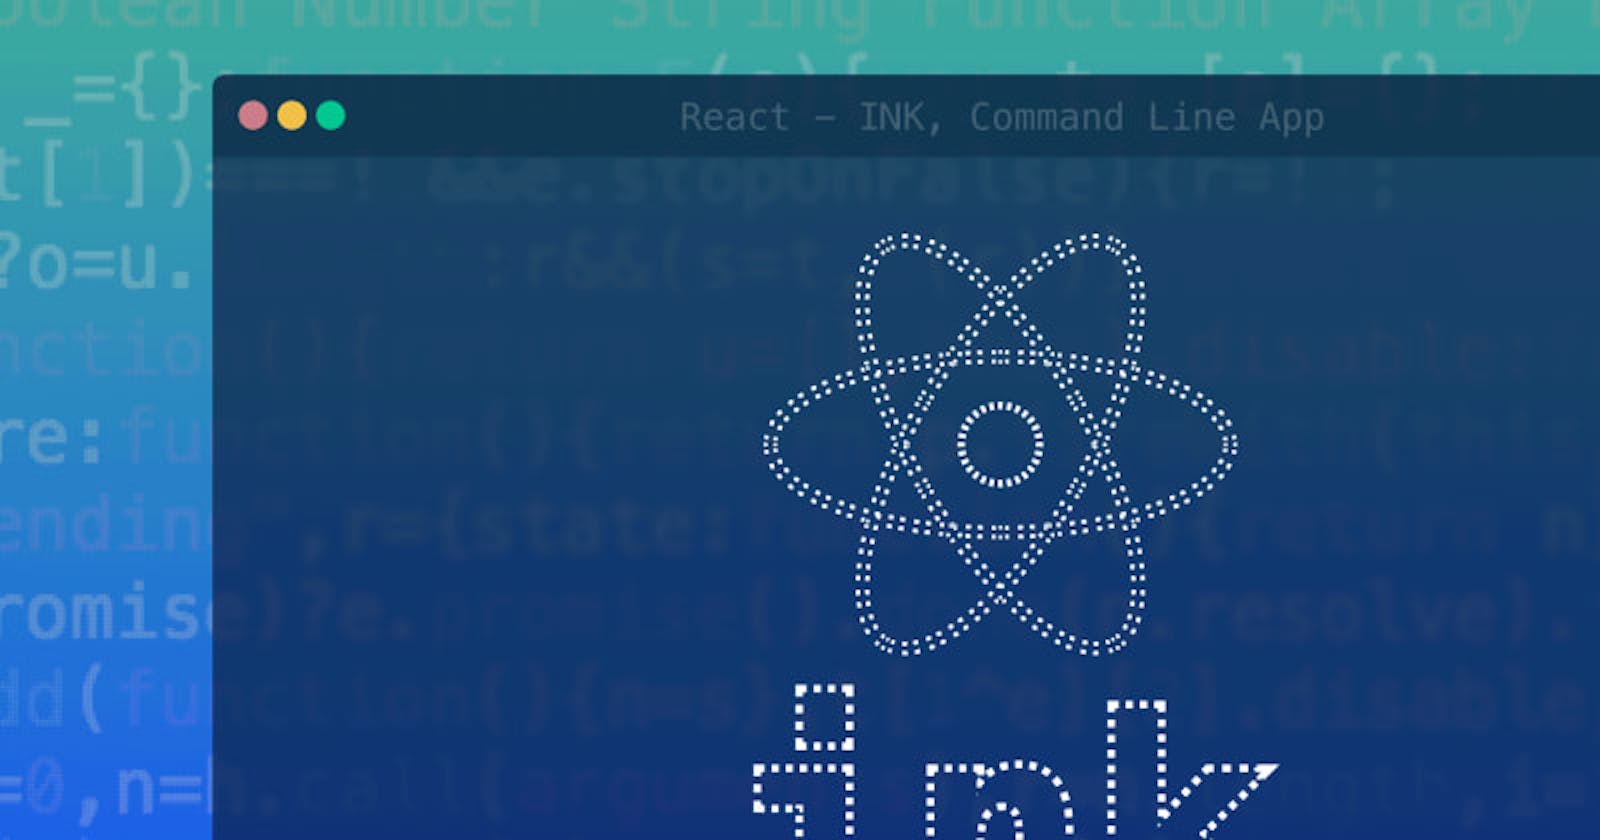 Building Command-Line Apps Using React Ink